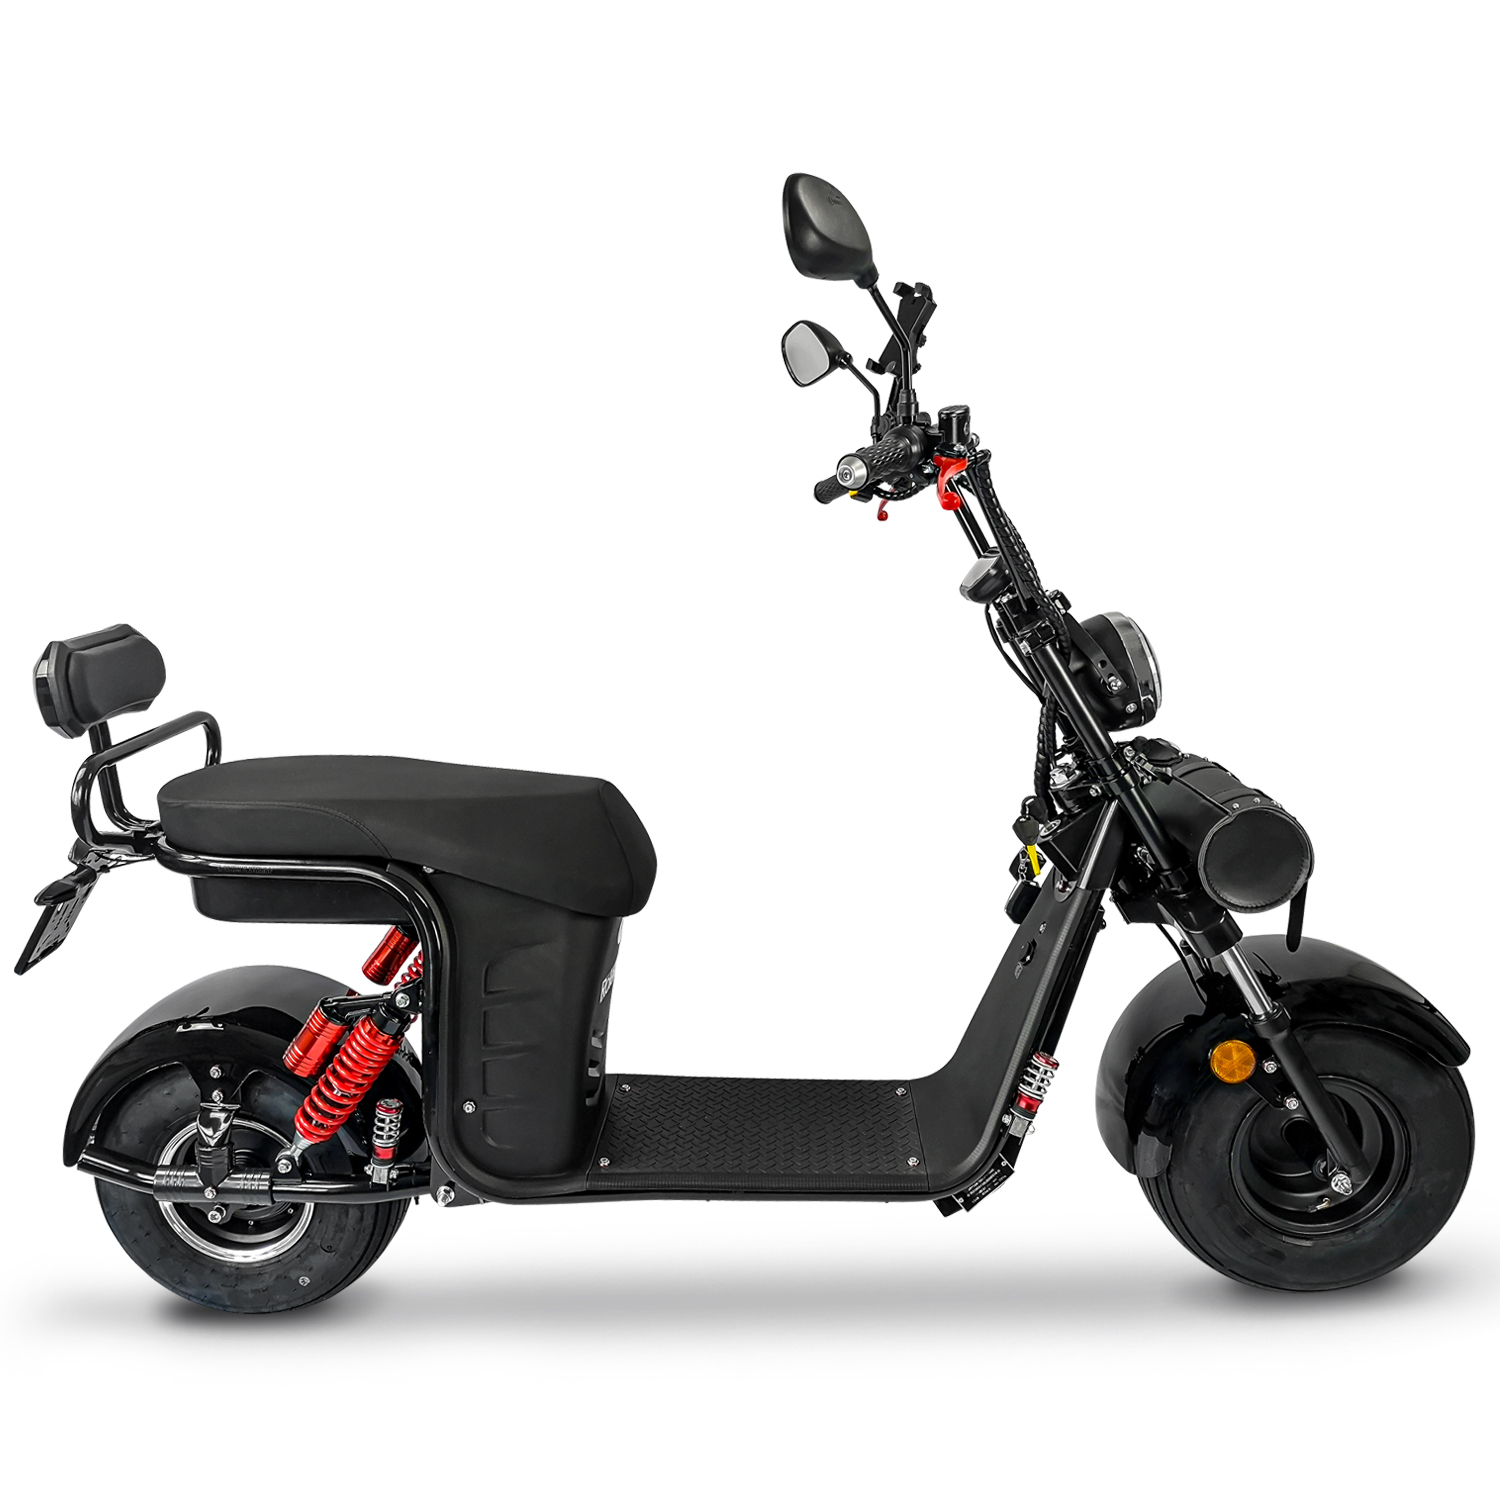 - 2 scooter incl. lithium Rolektro batteries E-Cruiser 45 battery elektro2rad.de with electric